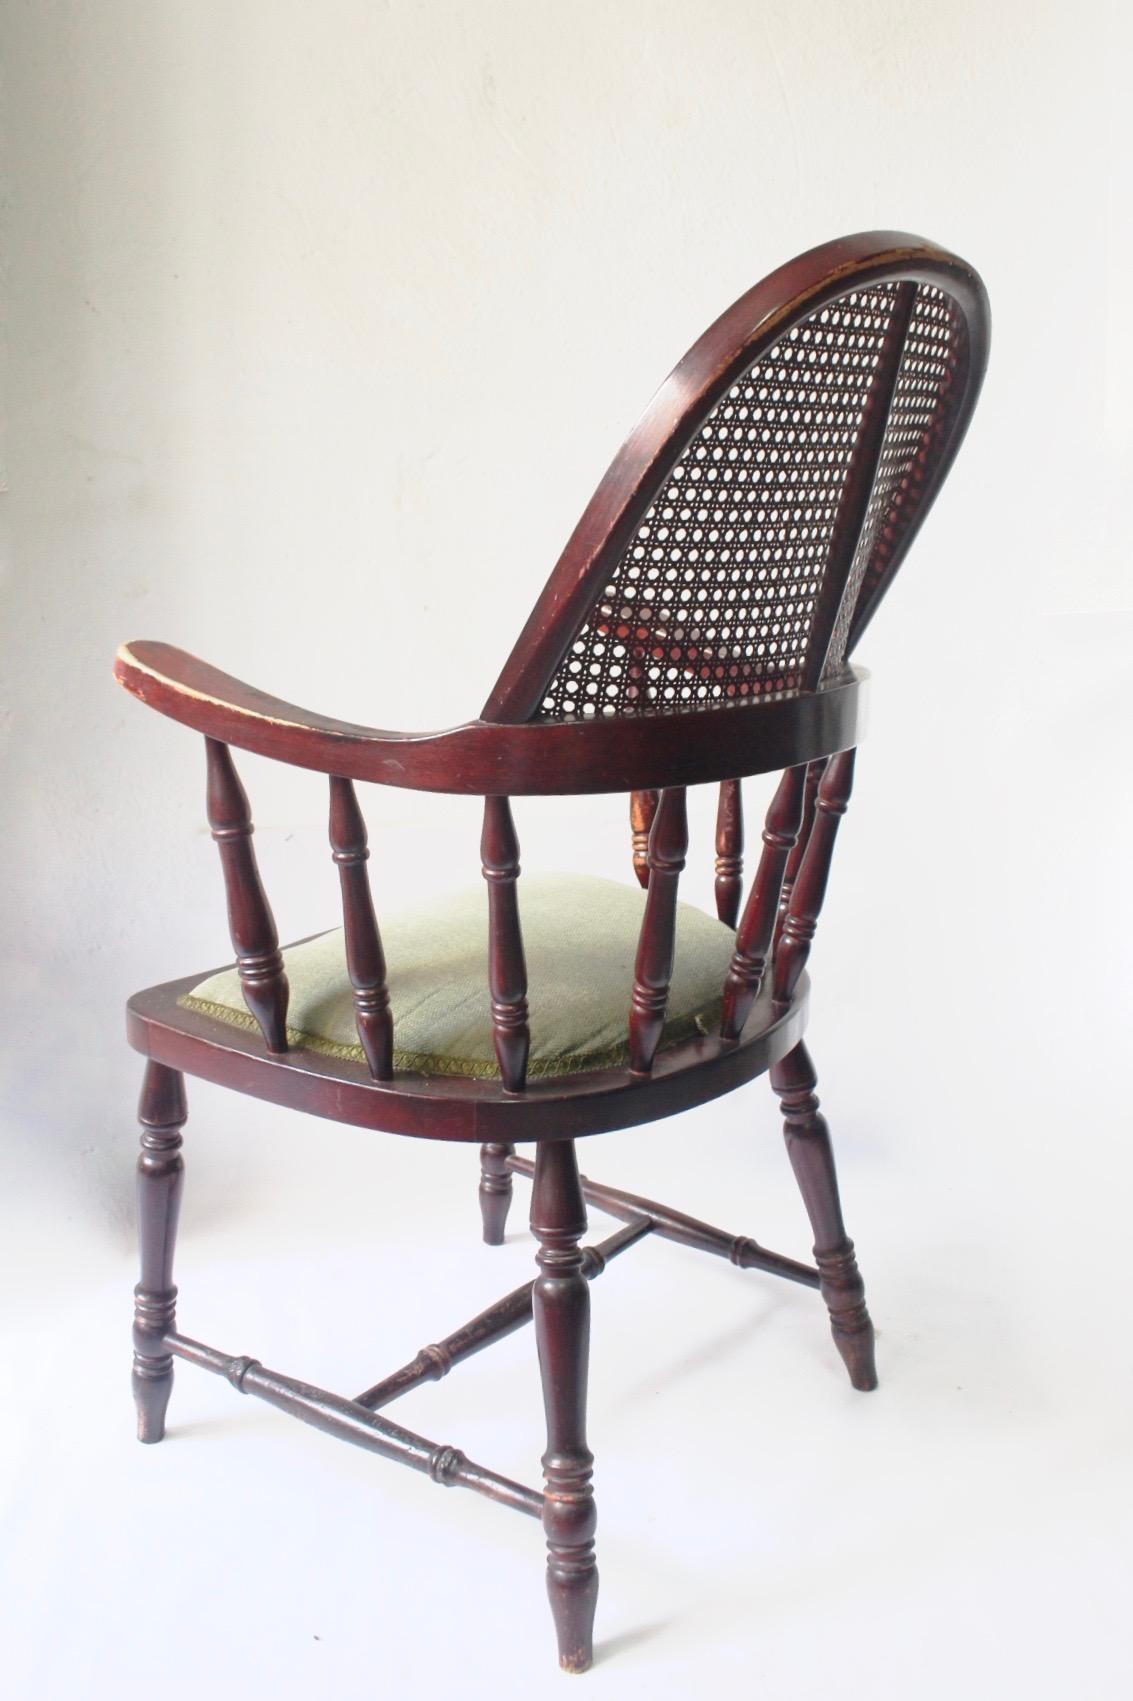 Wood Antique Uncommon English Windsor Stick Back Caned Chair, Late 19th Century For Sale